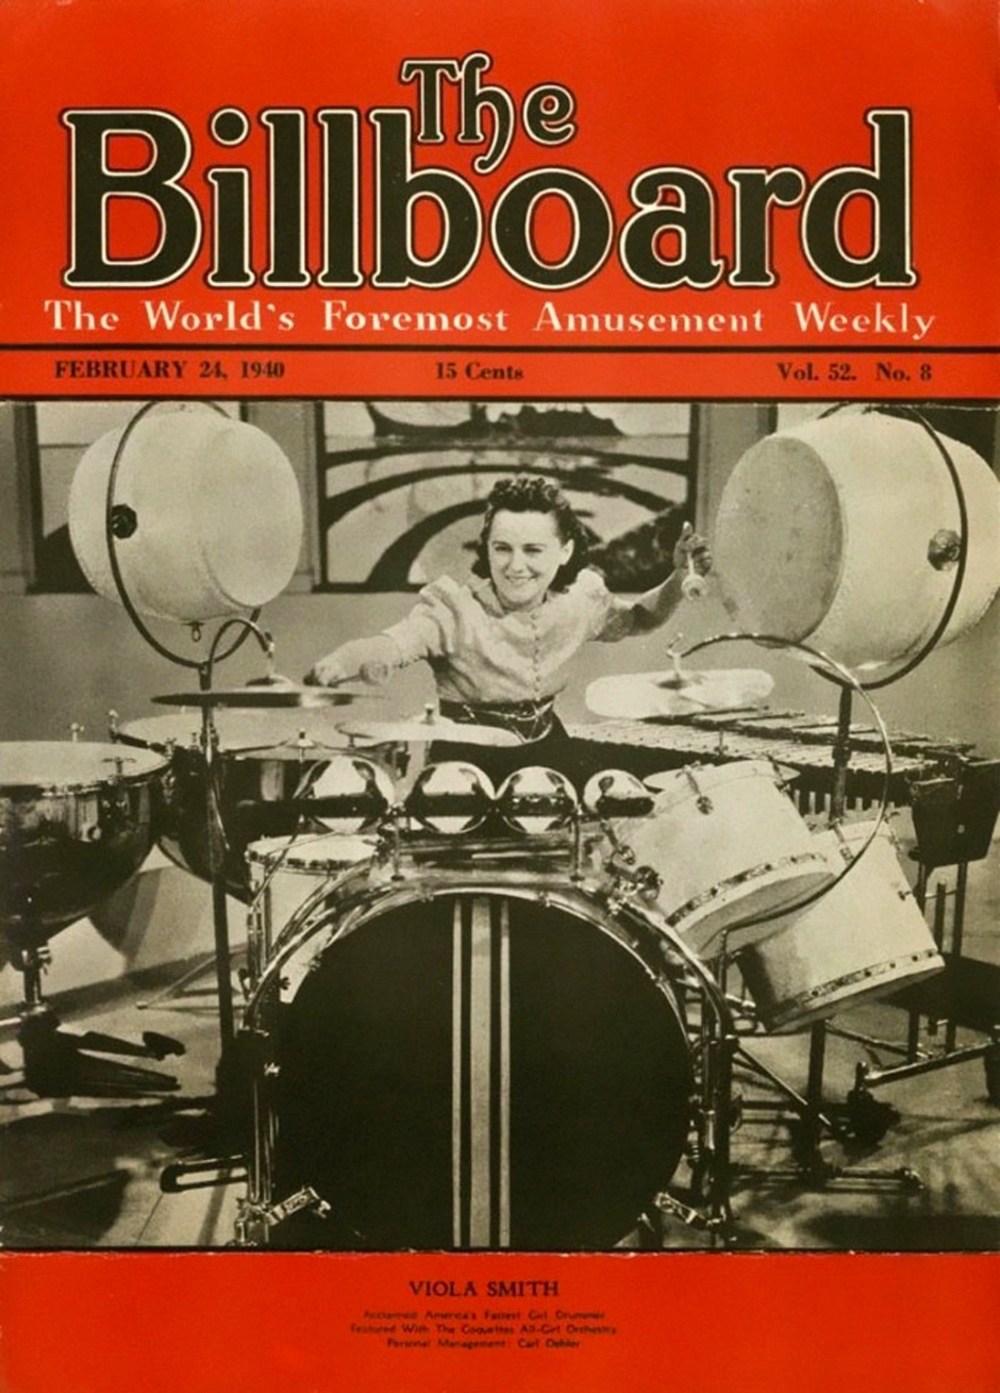 Viola Smith on the cover of Billbaord on February 24, 1940.